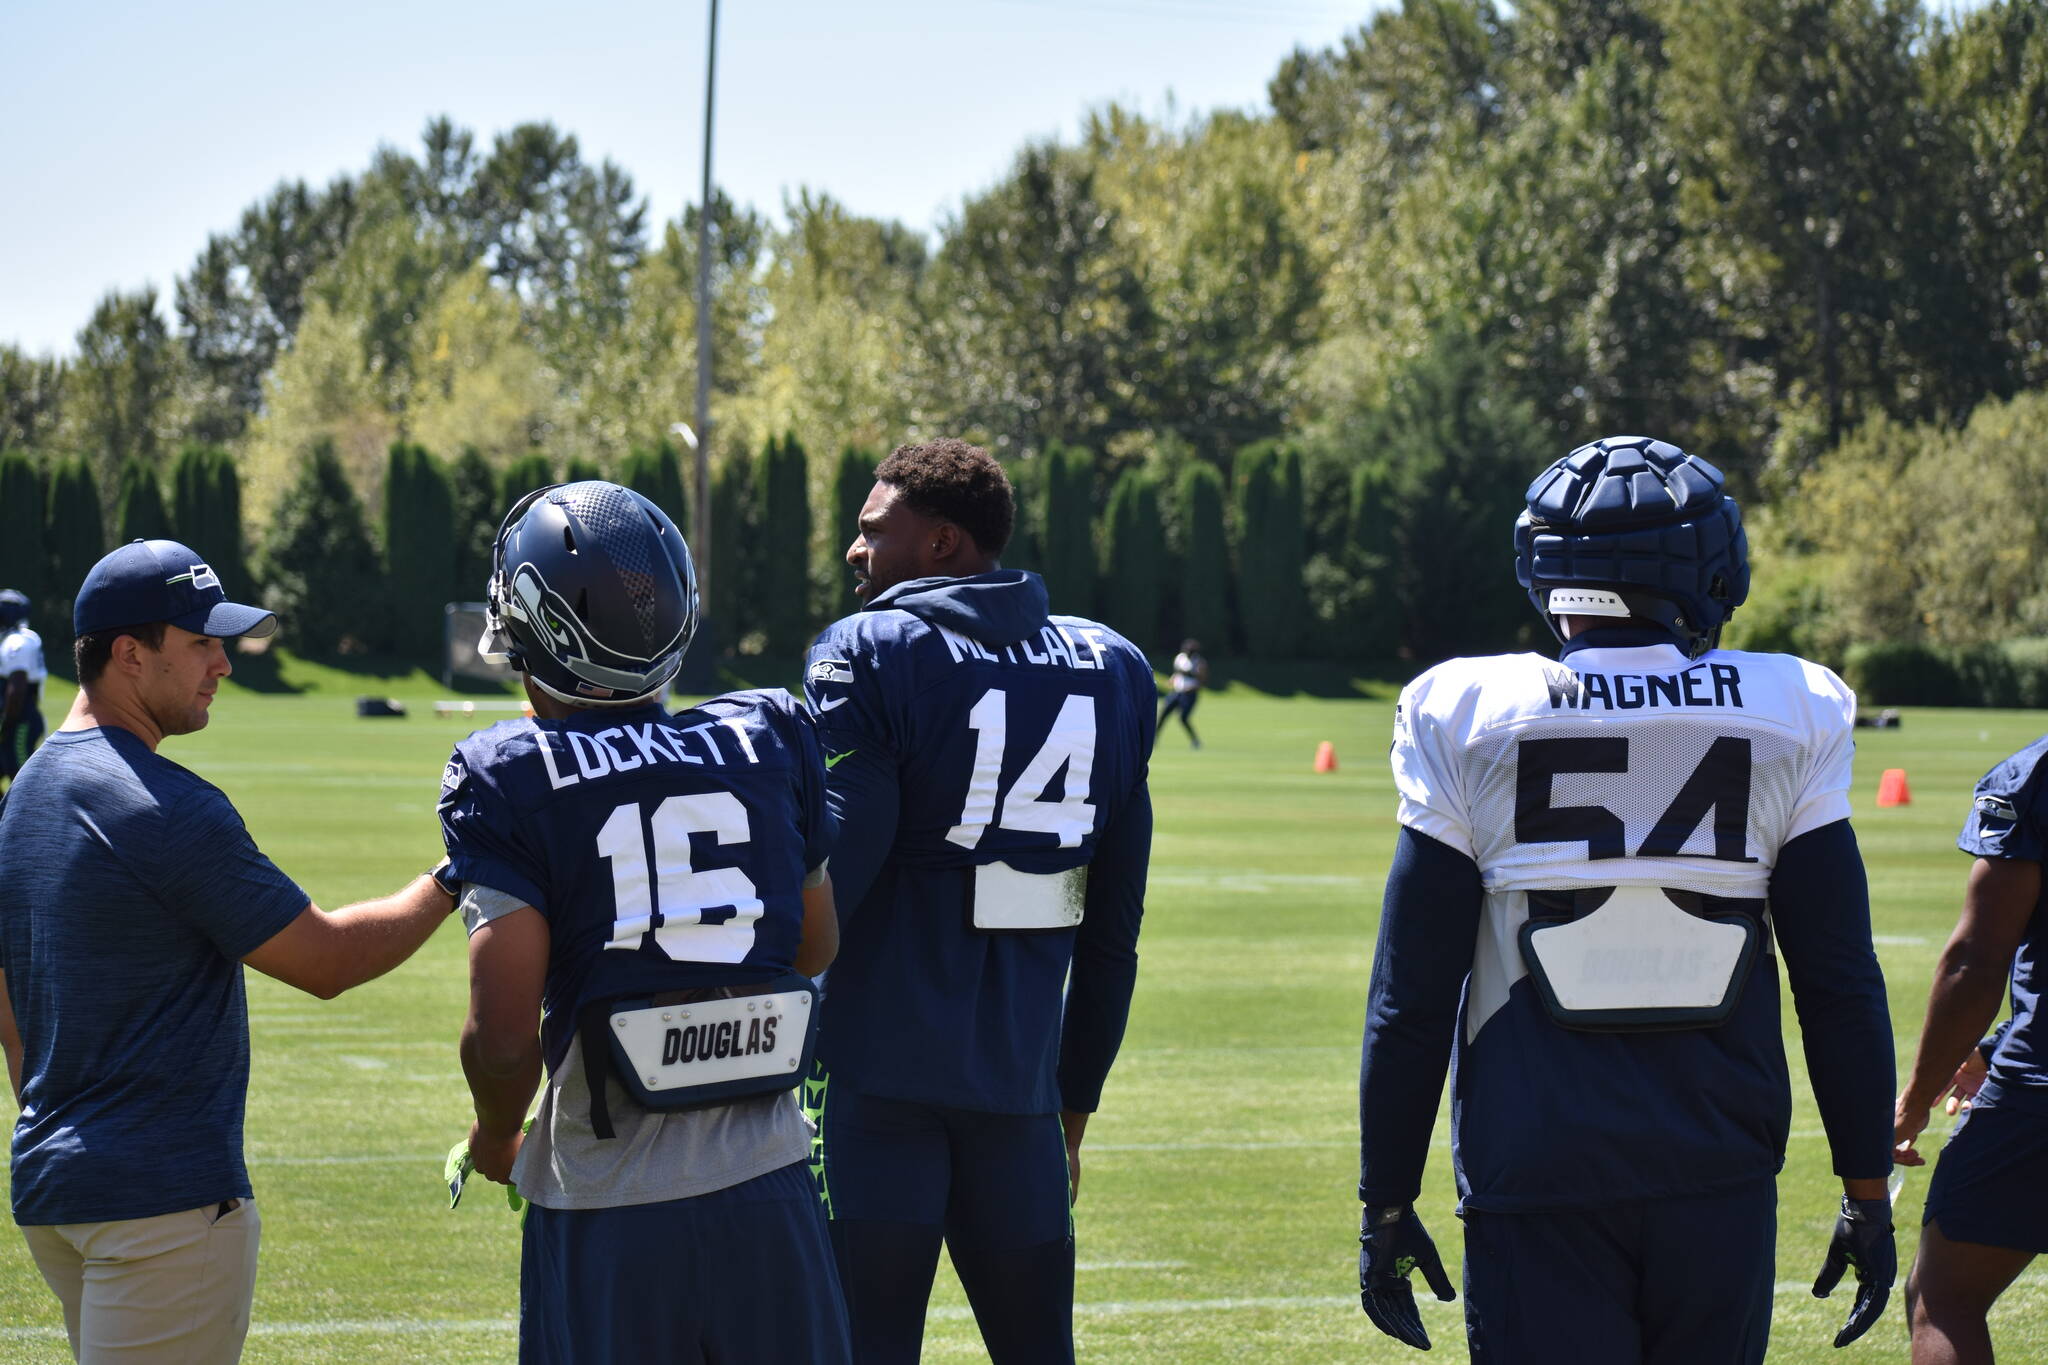 Seahawks fan favorites Tyler Lockett, DK Metcalf and Bobby Wagner talk before practice gets underway Aug. 1. (Photos by Ben Ray/Sound Publishing)